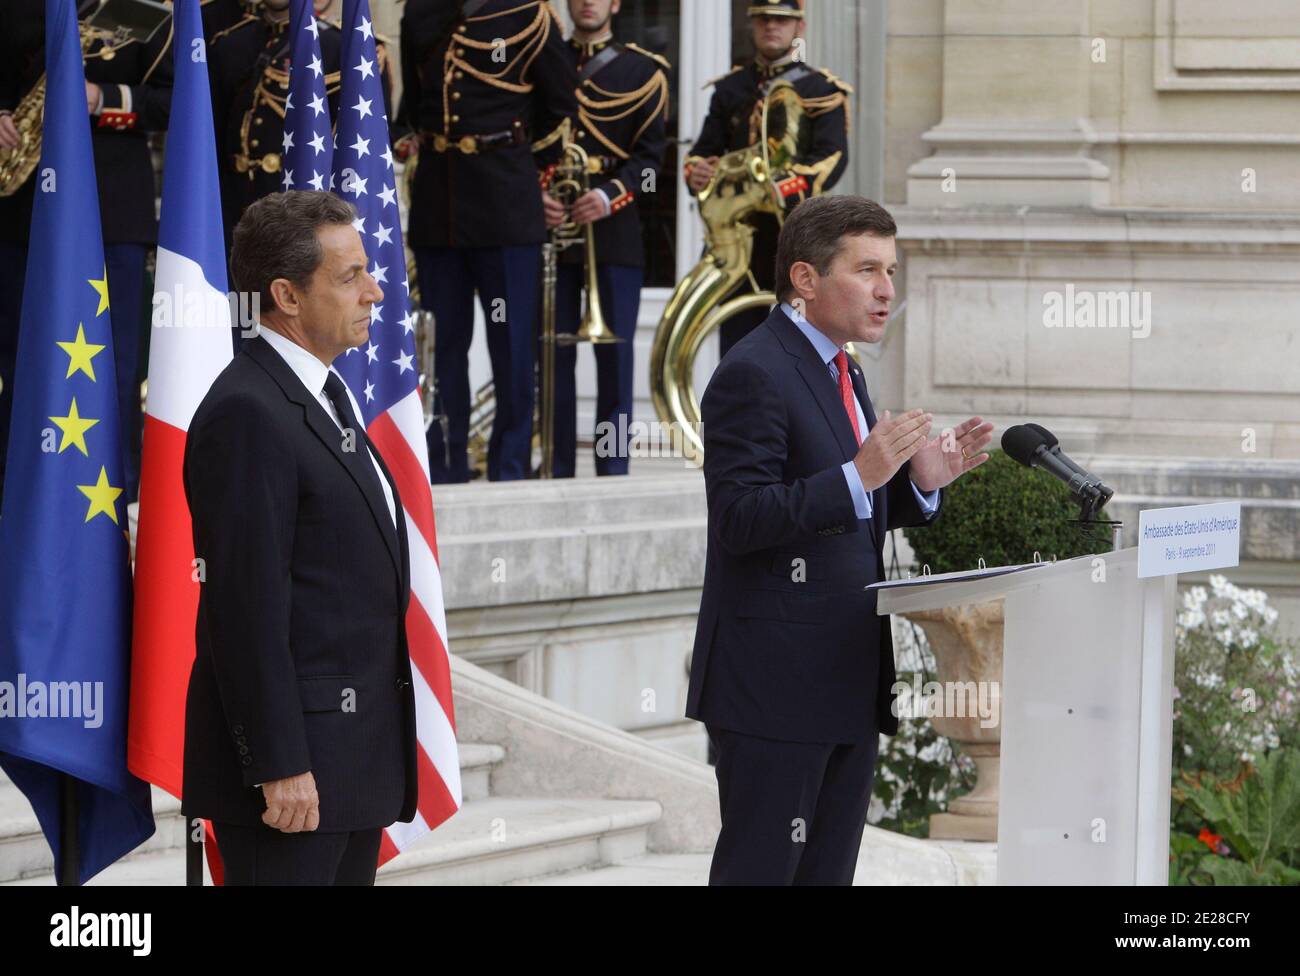 U.S. Ambassador Charles Rivkin gestures, as he speaks, while French President Nicolas Sarkozy, stands next to him during a ceremony at the U.S. Embassy in Paris, France on September 9, 2011, ahead of the 10-year anniversary of the attacks on Sunday. Photo by Michel Euler/Pool/ABACAPRESS.COM Stock Photo